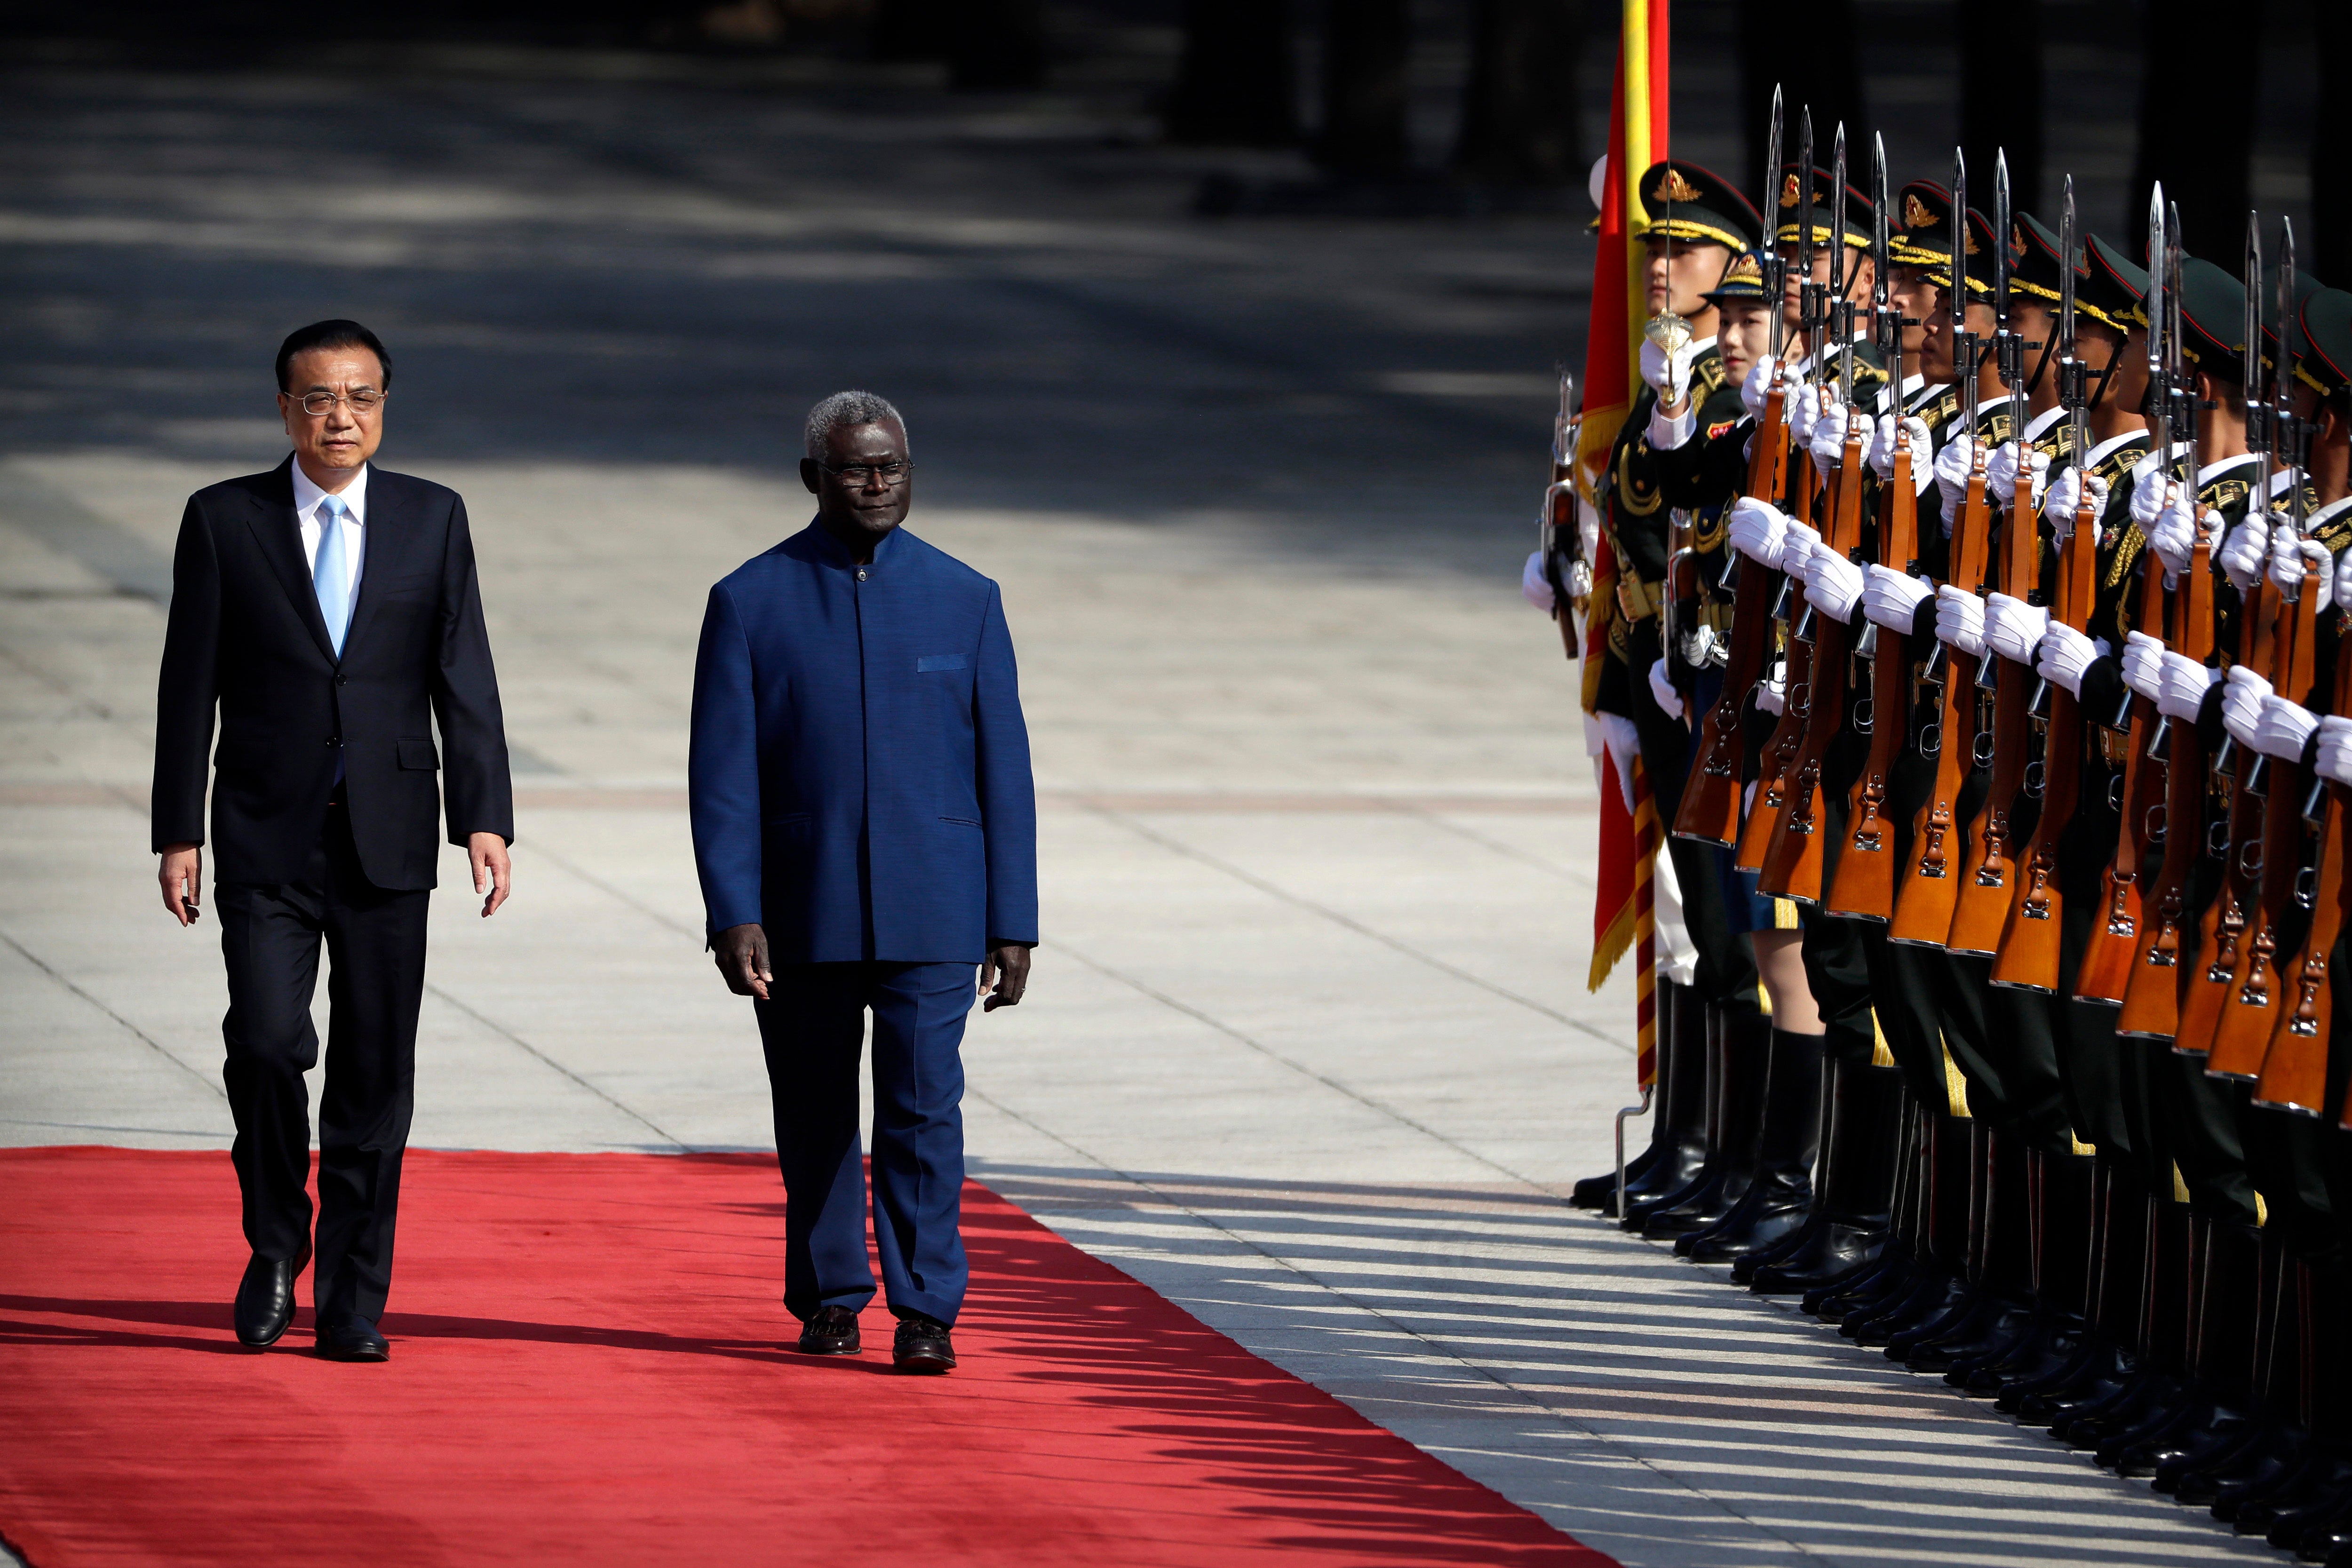 Chinese premier Li Keqiang and Mr Sogavare review an honour guard during a welcoming ceremony at the Great Hall of the People in Beijing in October 2019